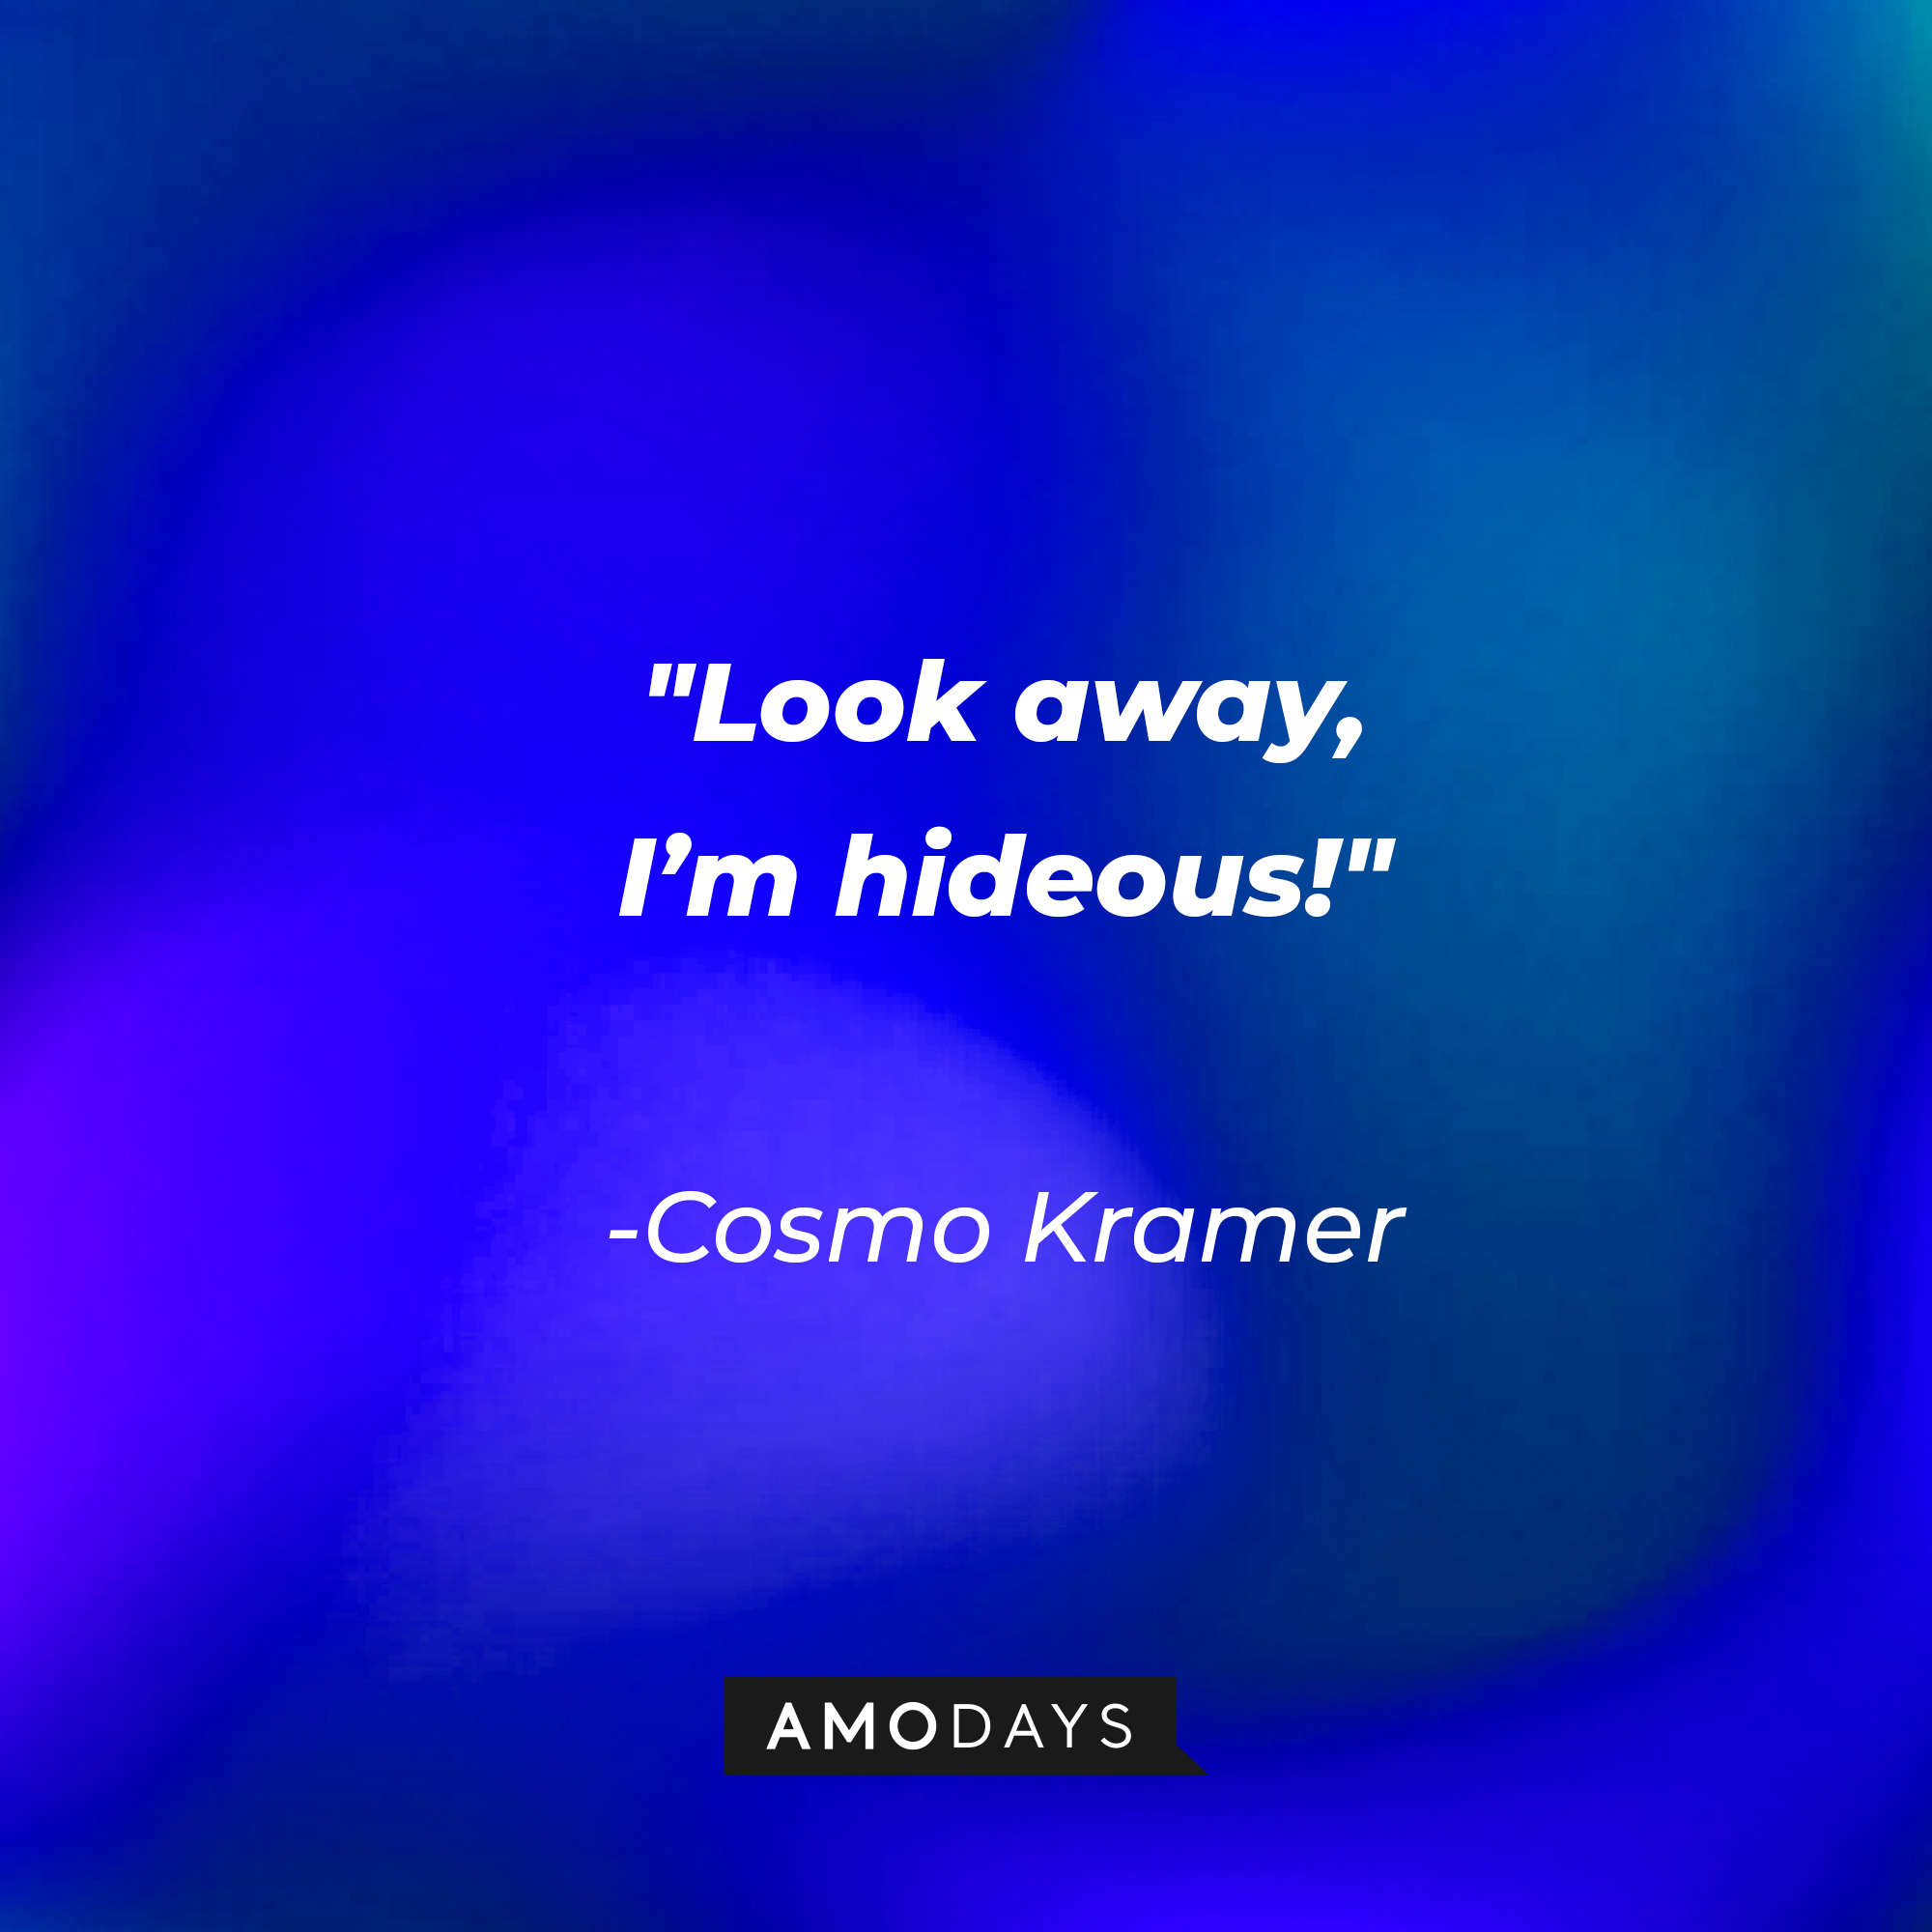 Cosmo Kramer’s quote: "Look away, I’m hideous!" | Source: AmoDays